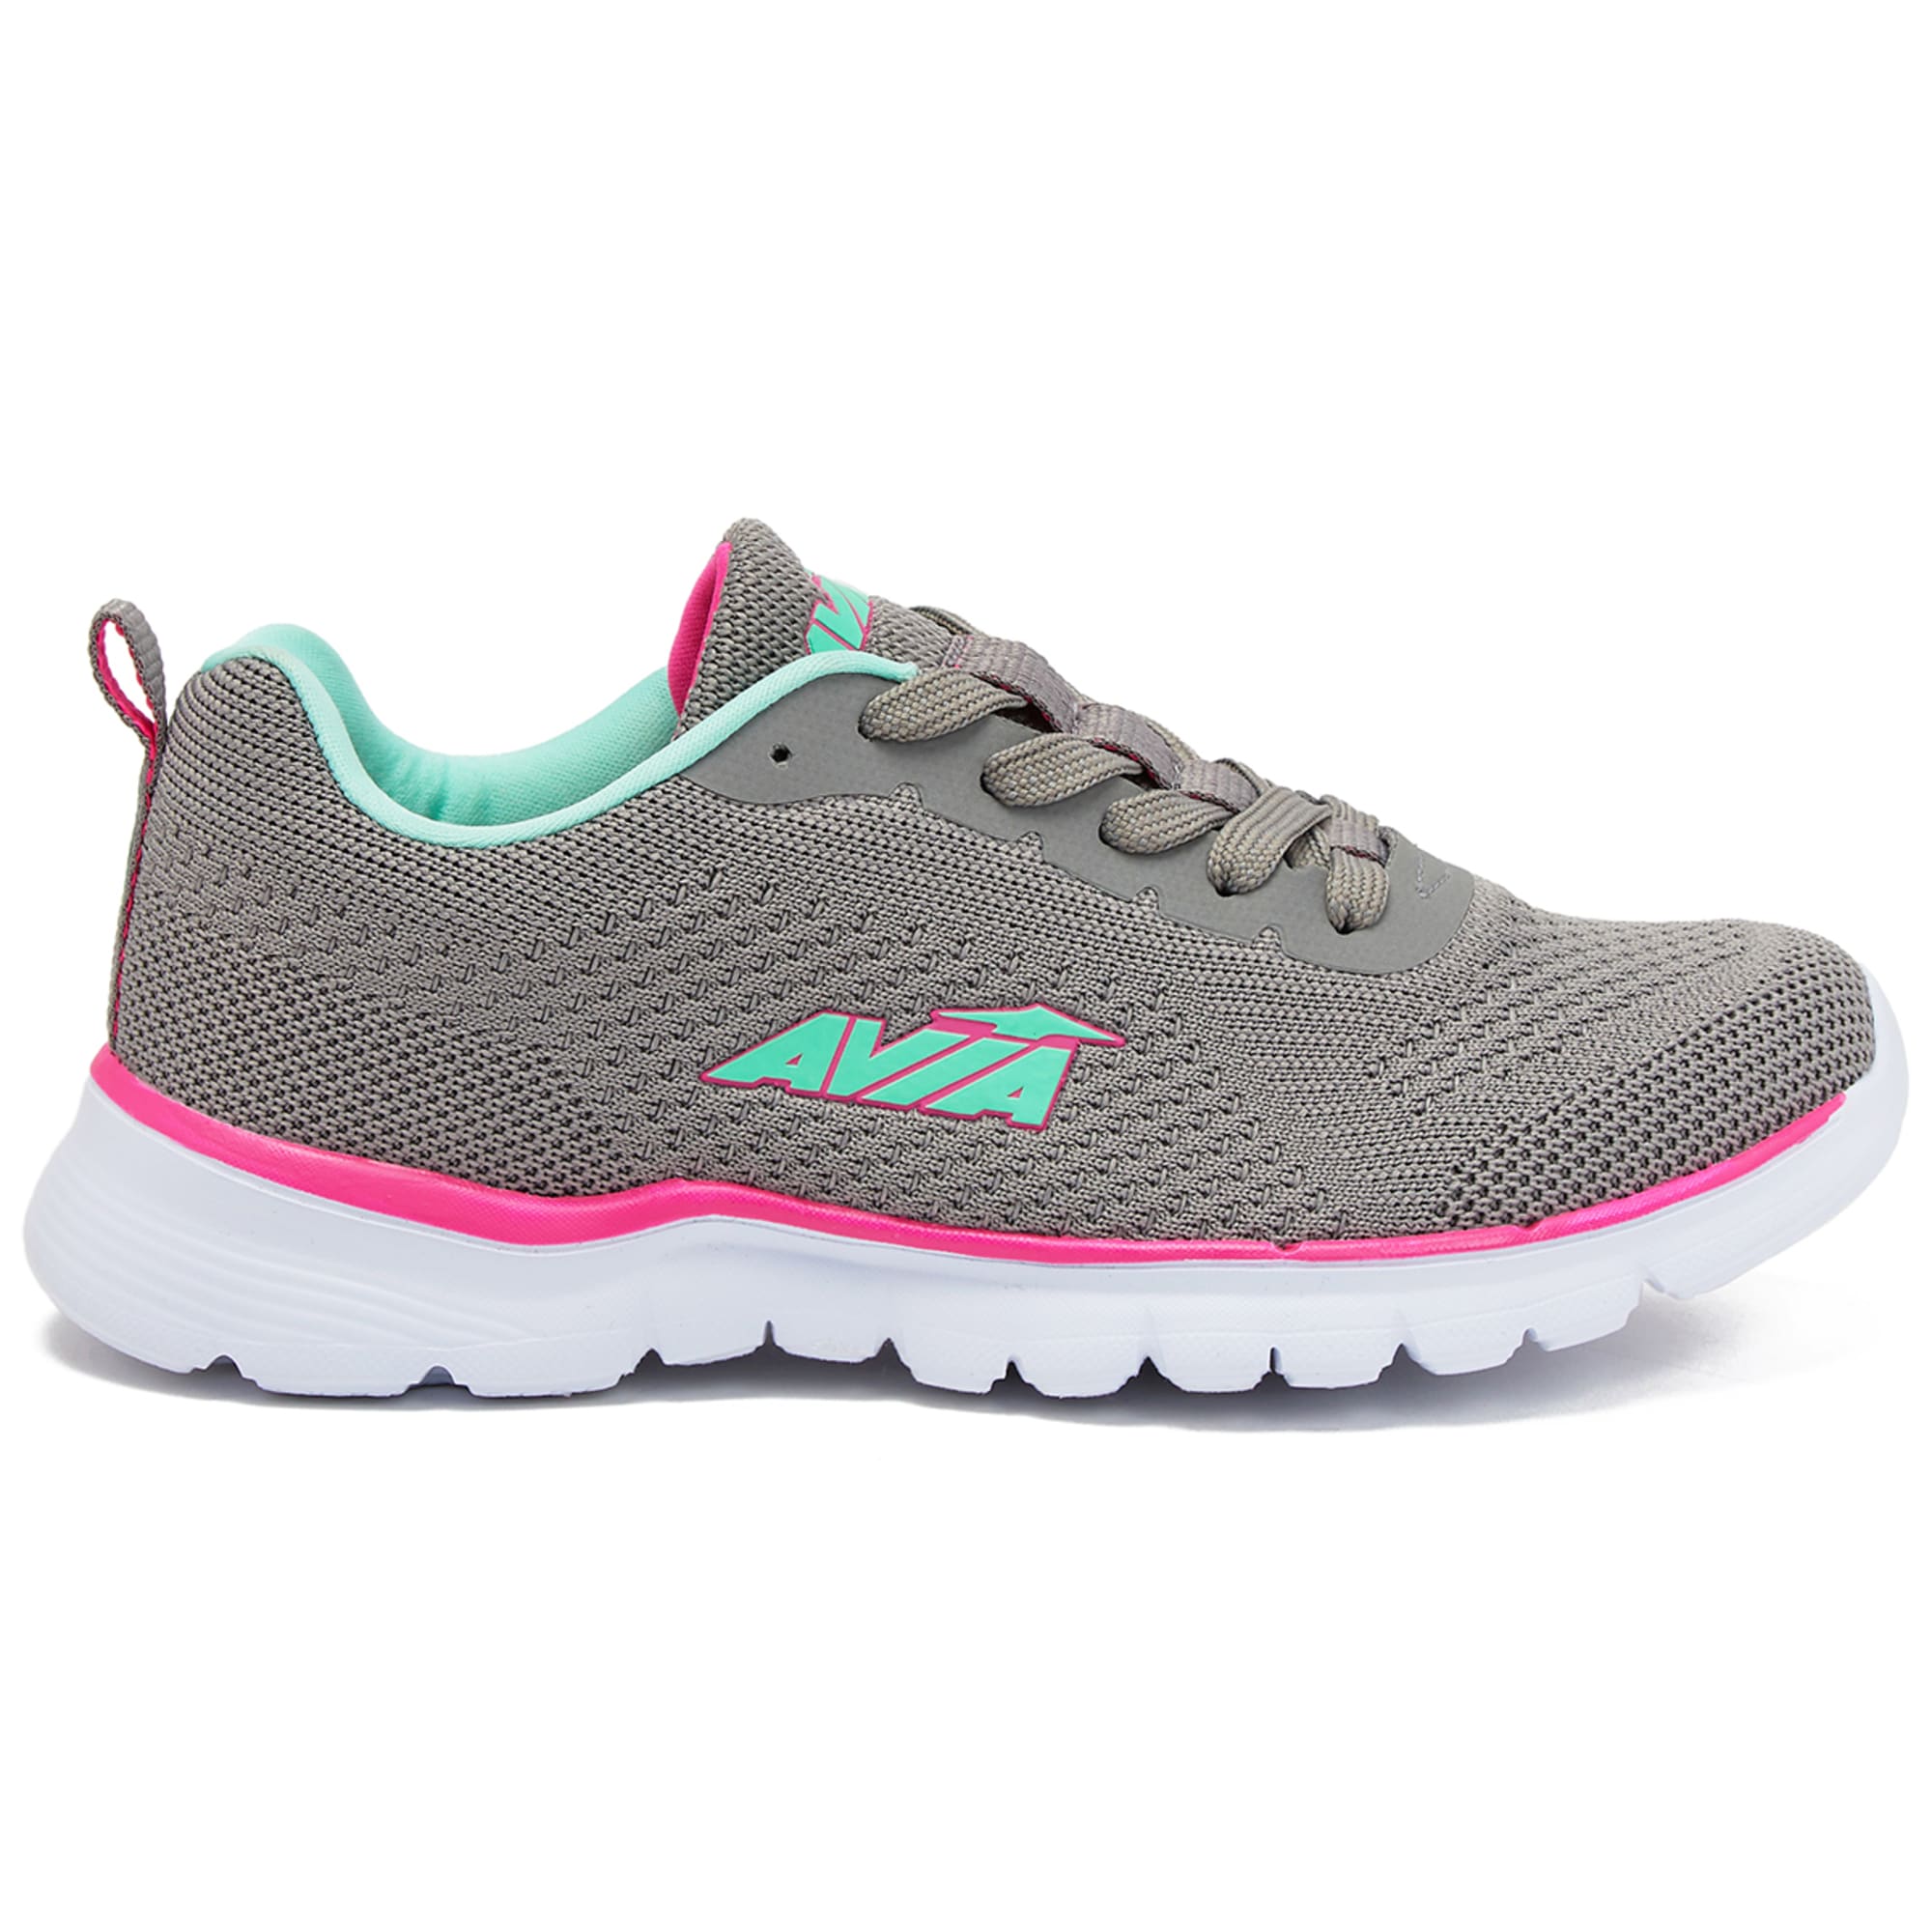 Avia Size 11 Cantilever Pink, Blue Running Shoes Women's Free Shipping